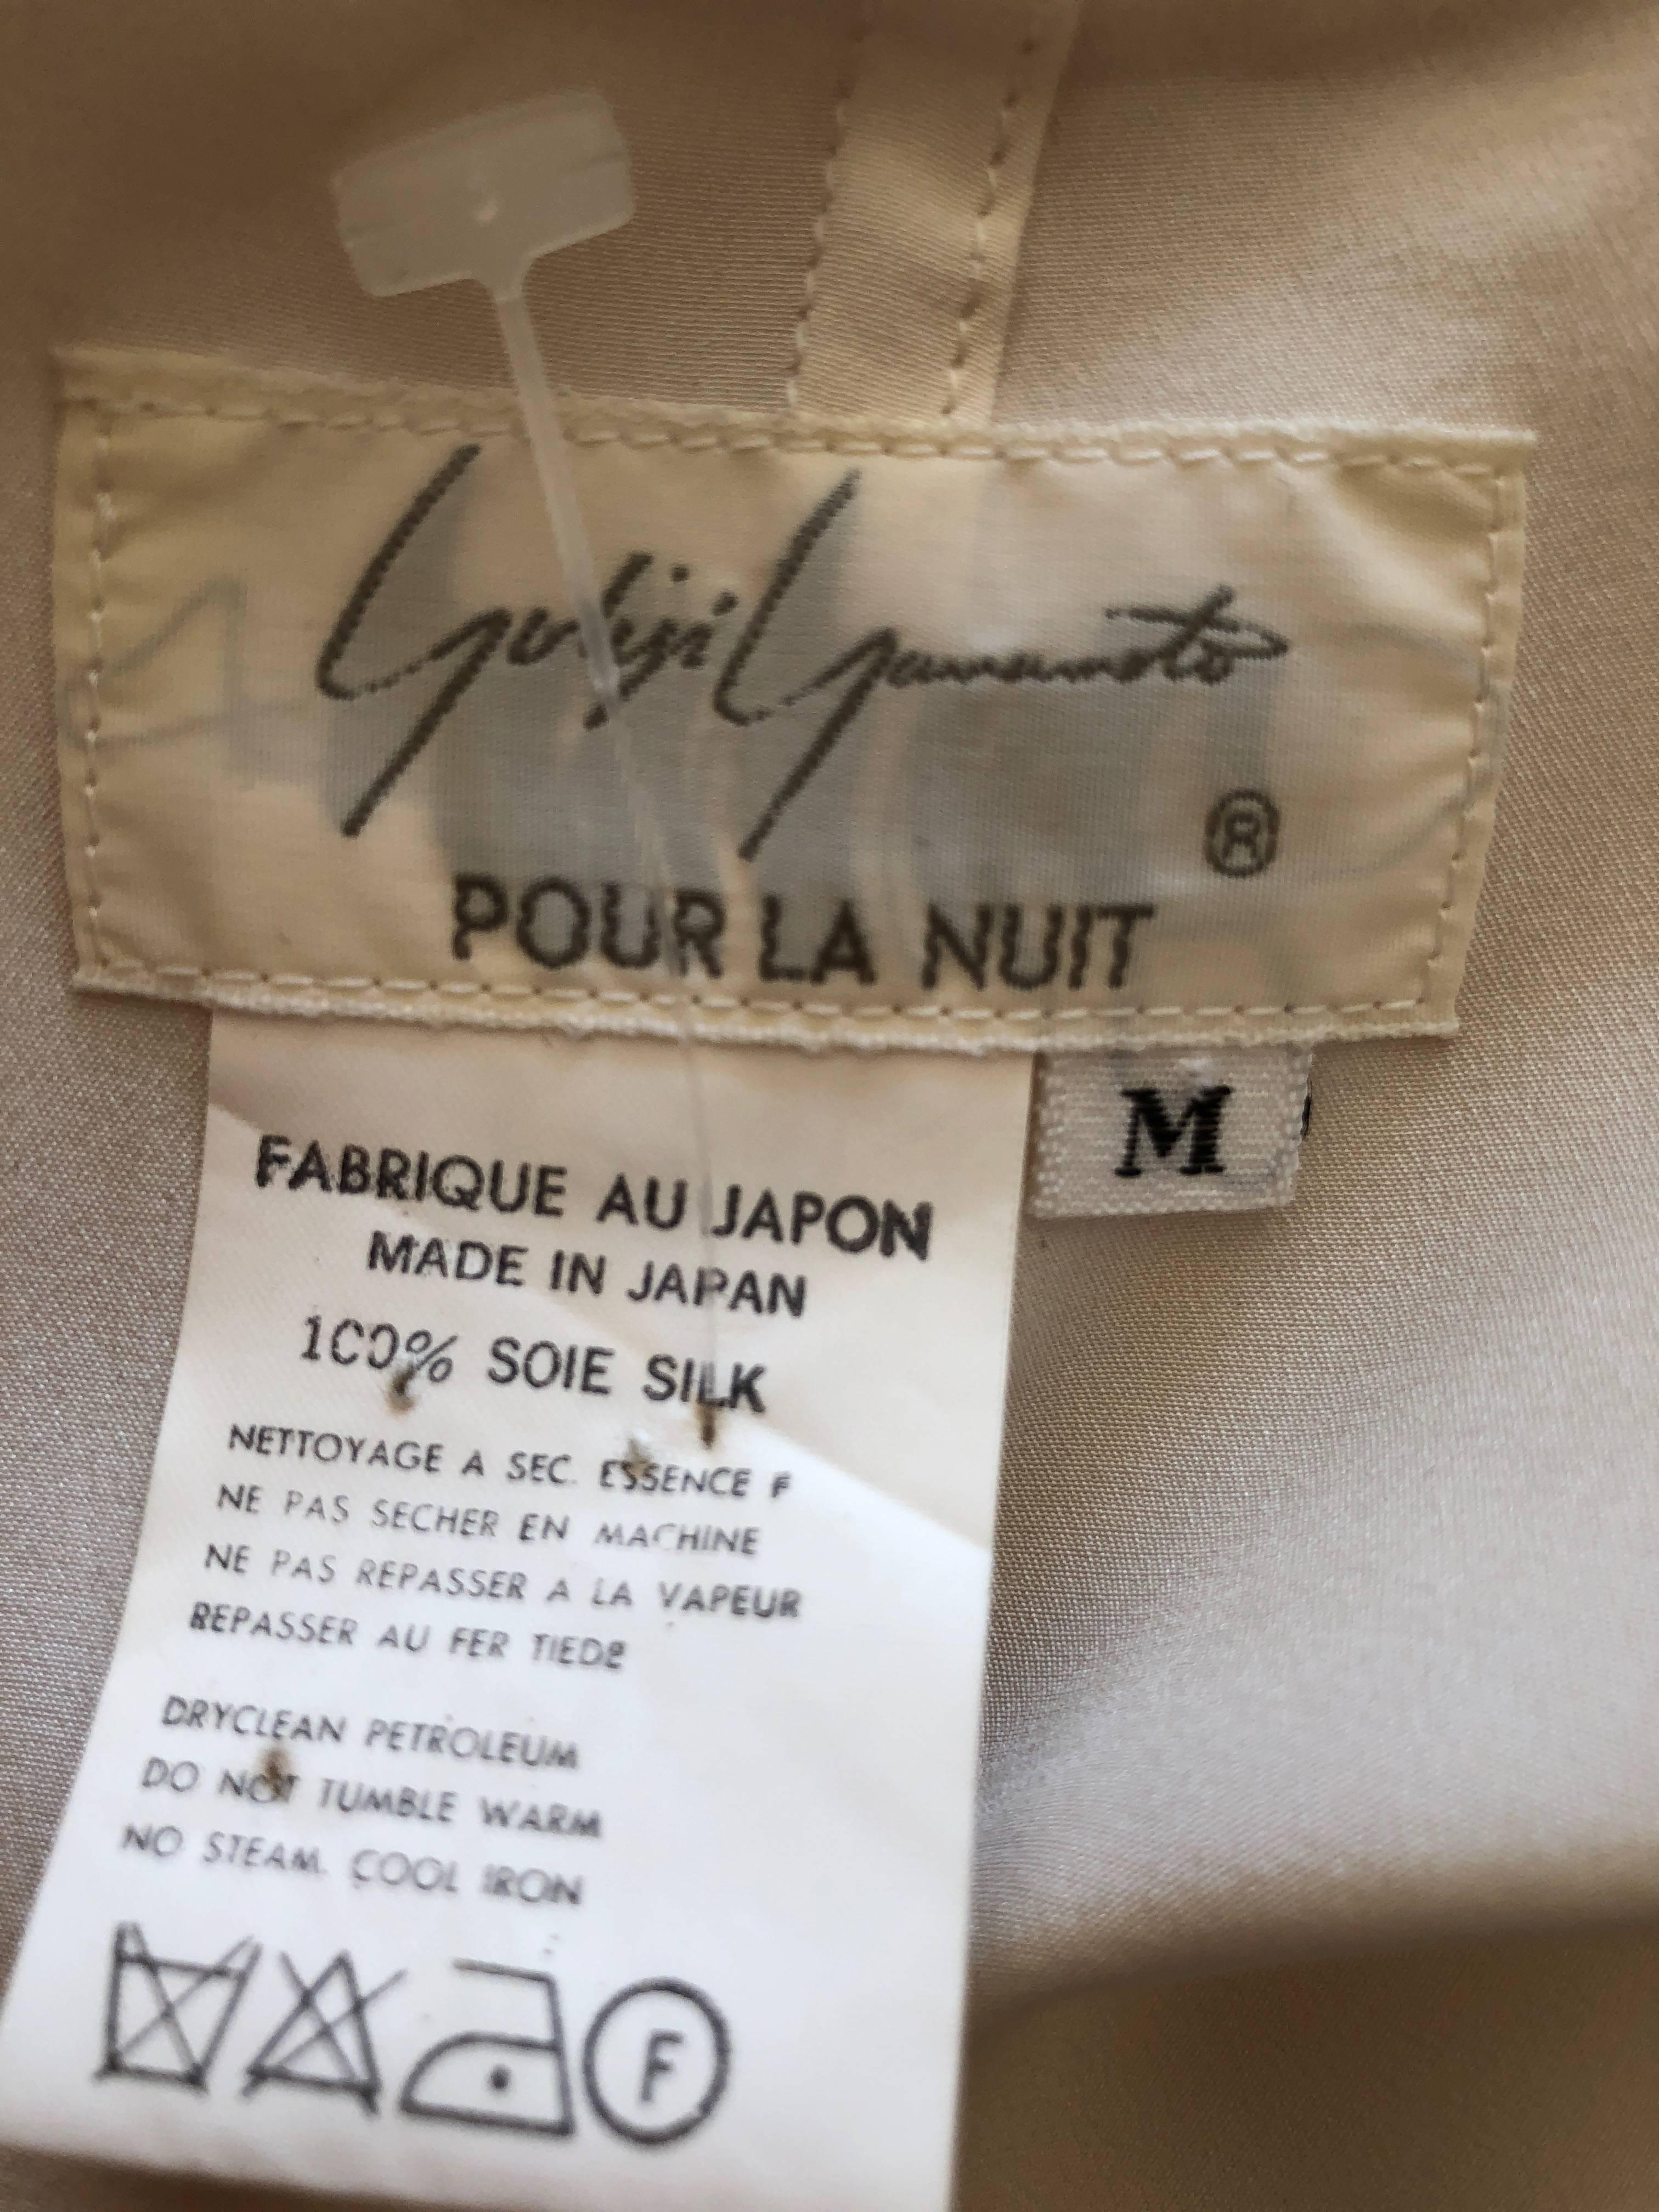 Yohji Yamamoto 1990's Silk Wrap Blouse. This is so pretty, and wraps to close.
Could be worn as a tunic or micro mini dress.
The label reads "Yohji Yamamoto Pour la Nuit".
Pure silk
Marked Size M
Bust 38"
Length 30"